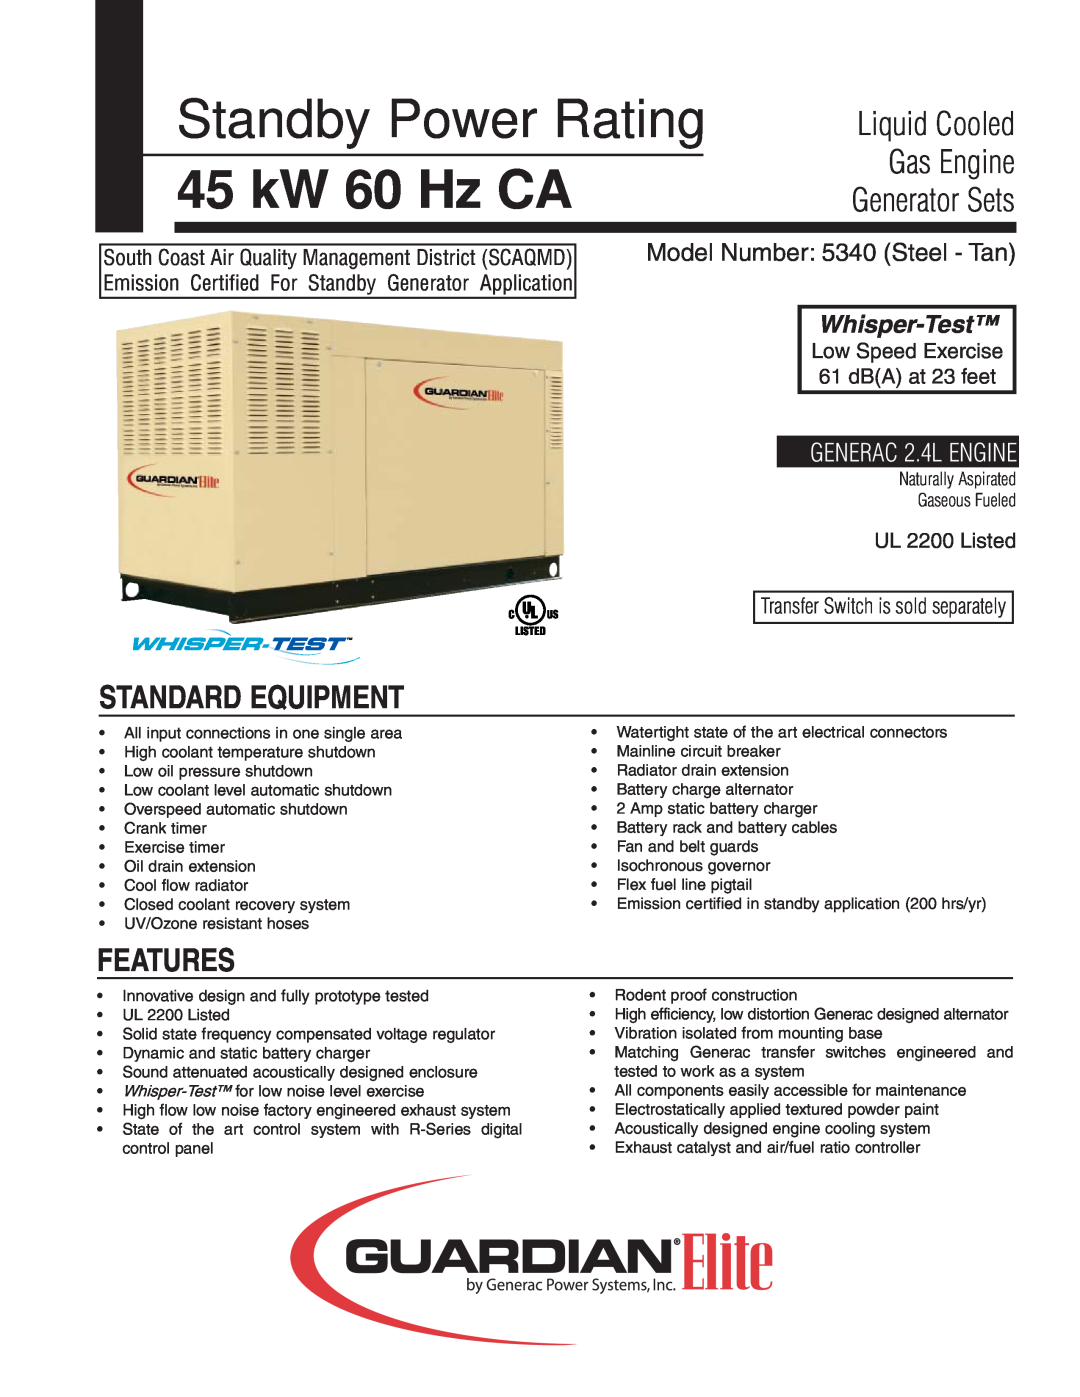 Generac Power Systems 5340 manual Standby Power Rating, 45 kW 60 Hz CA, Liquid Cooled, Generator Sets, Gas Engine 